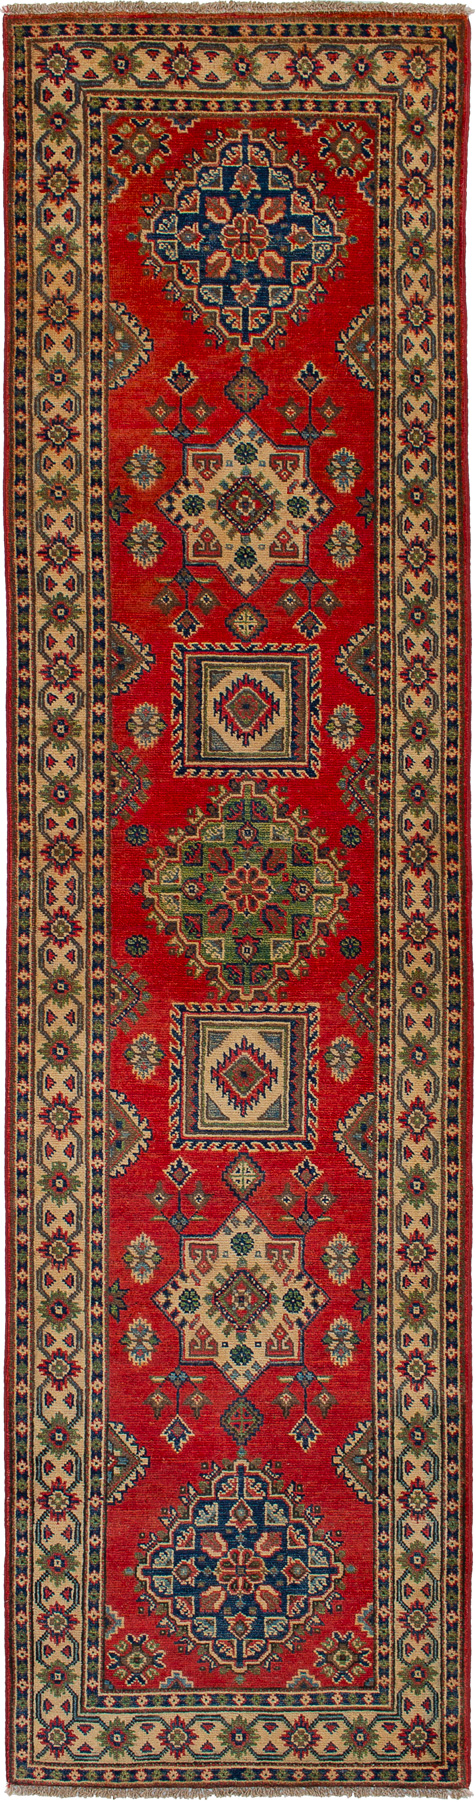 Hand-knotted Finest Gazni Red Wool Rug 2'6" x 9'11"  Size: 2'6" x 9'11"  